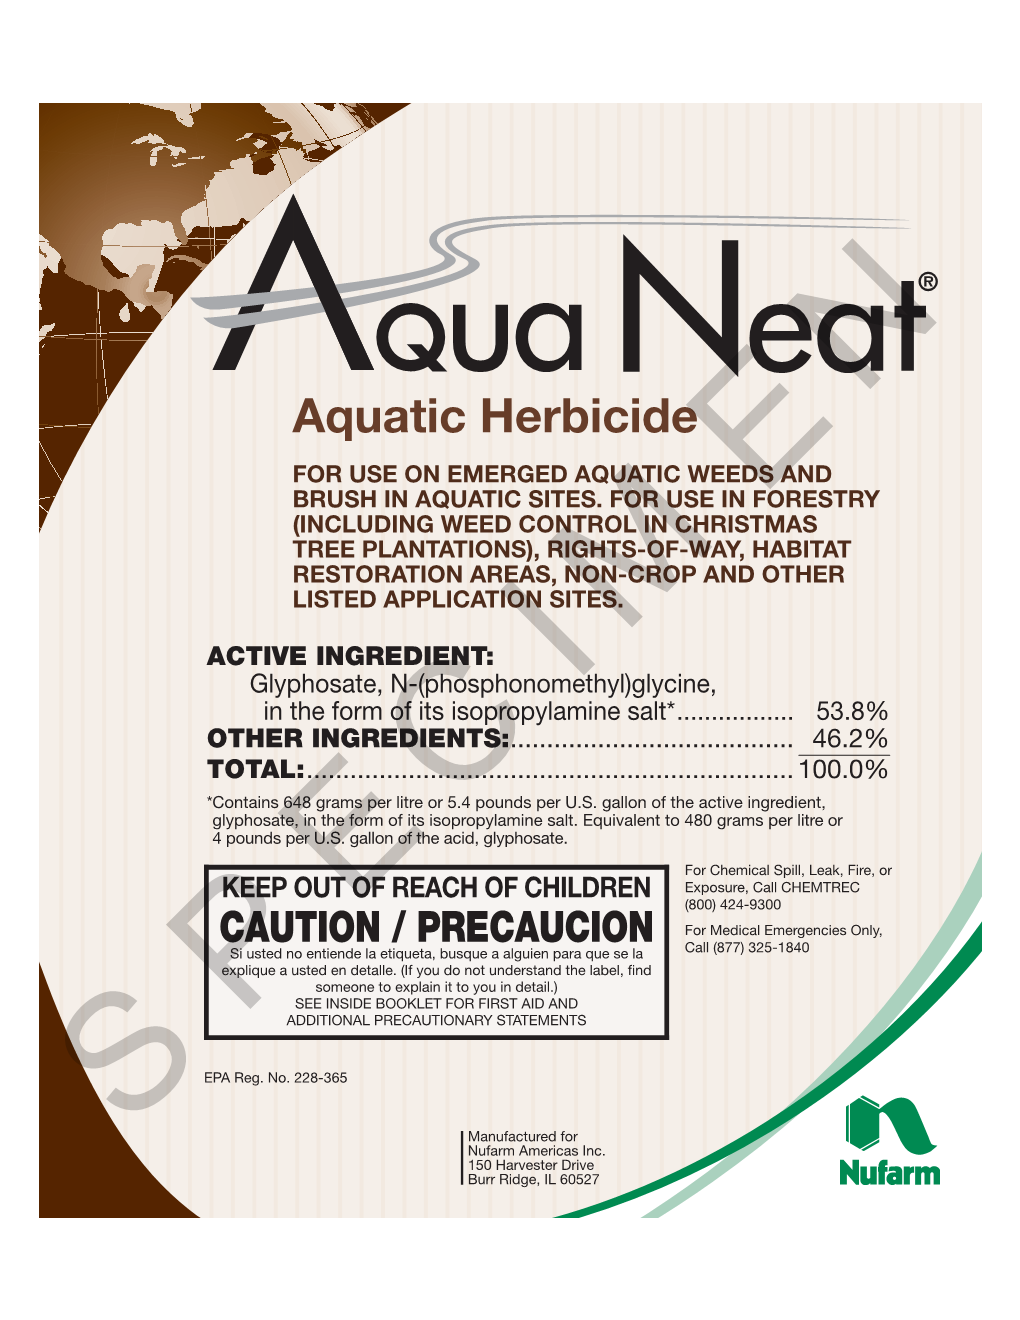 Aquatic Herbicide for USE on EMERGED AQUATIC WEEDS and BRUSH in AQUATIC SITES